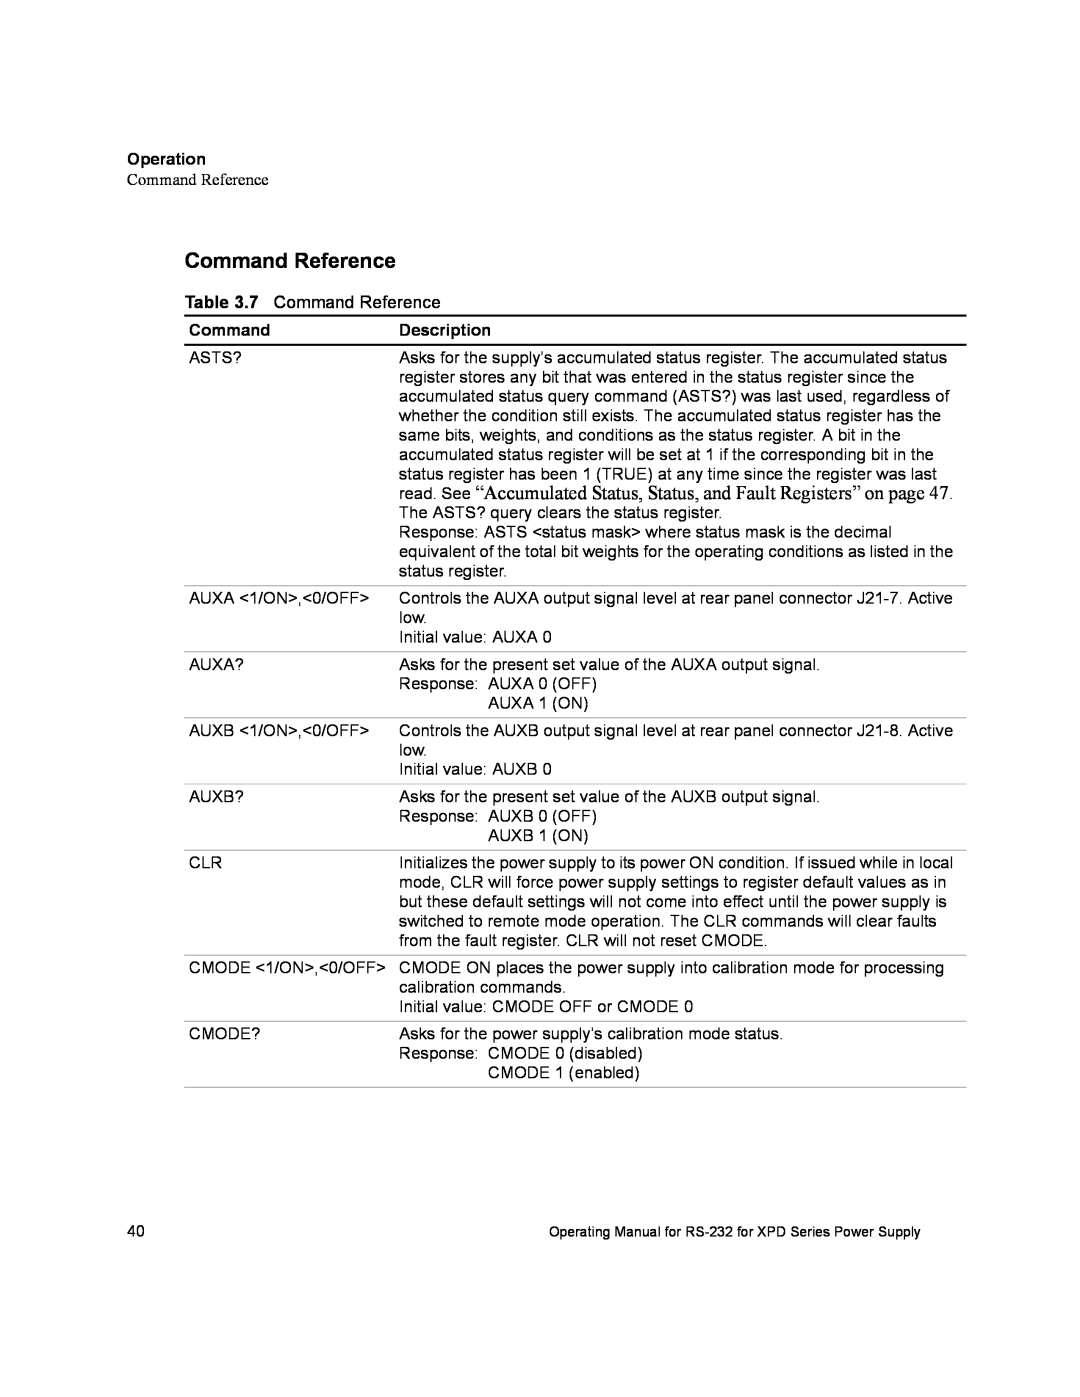 Xantrex Technology RS232-XPD manual Command Reference, read. See “Accumulated Status, Status, and Fault Registers” on page 